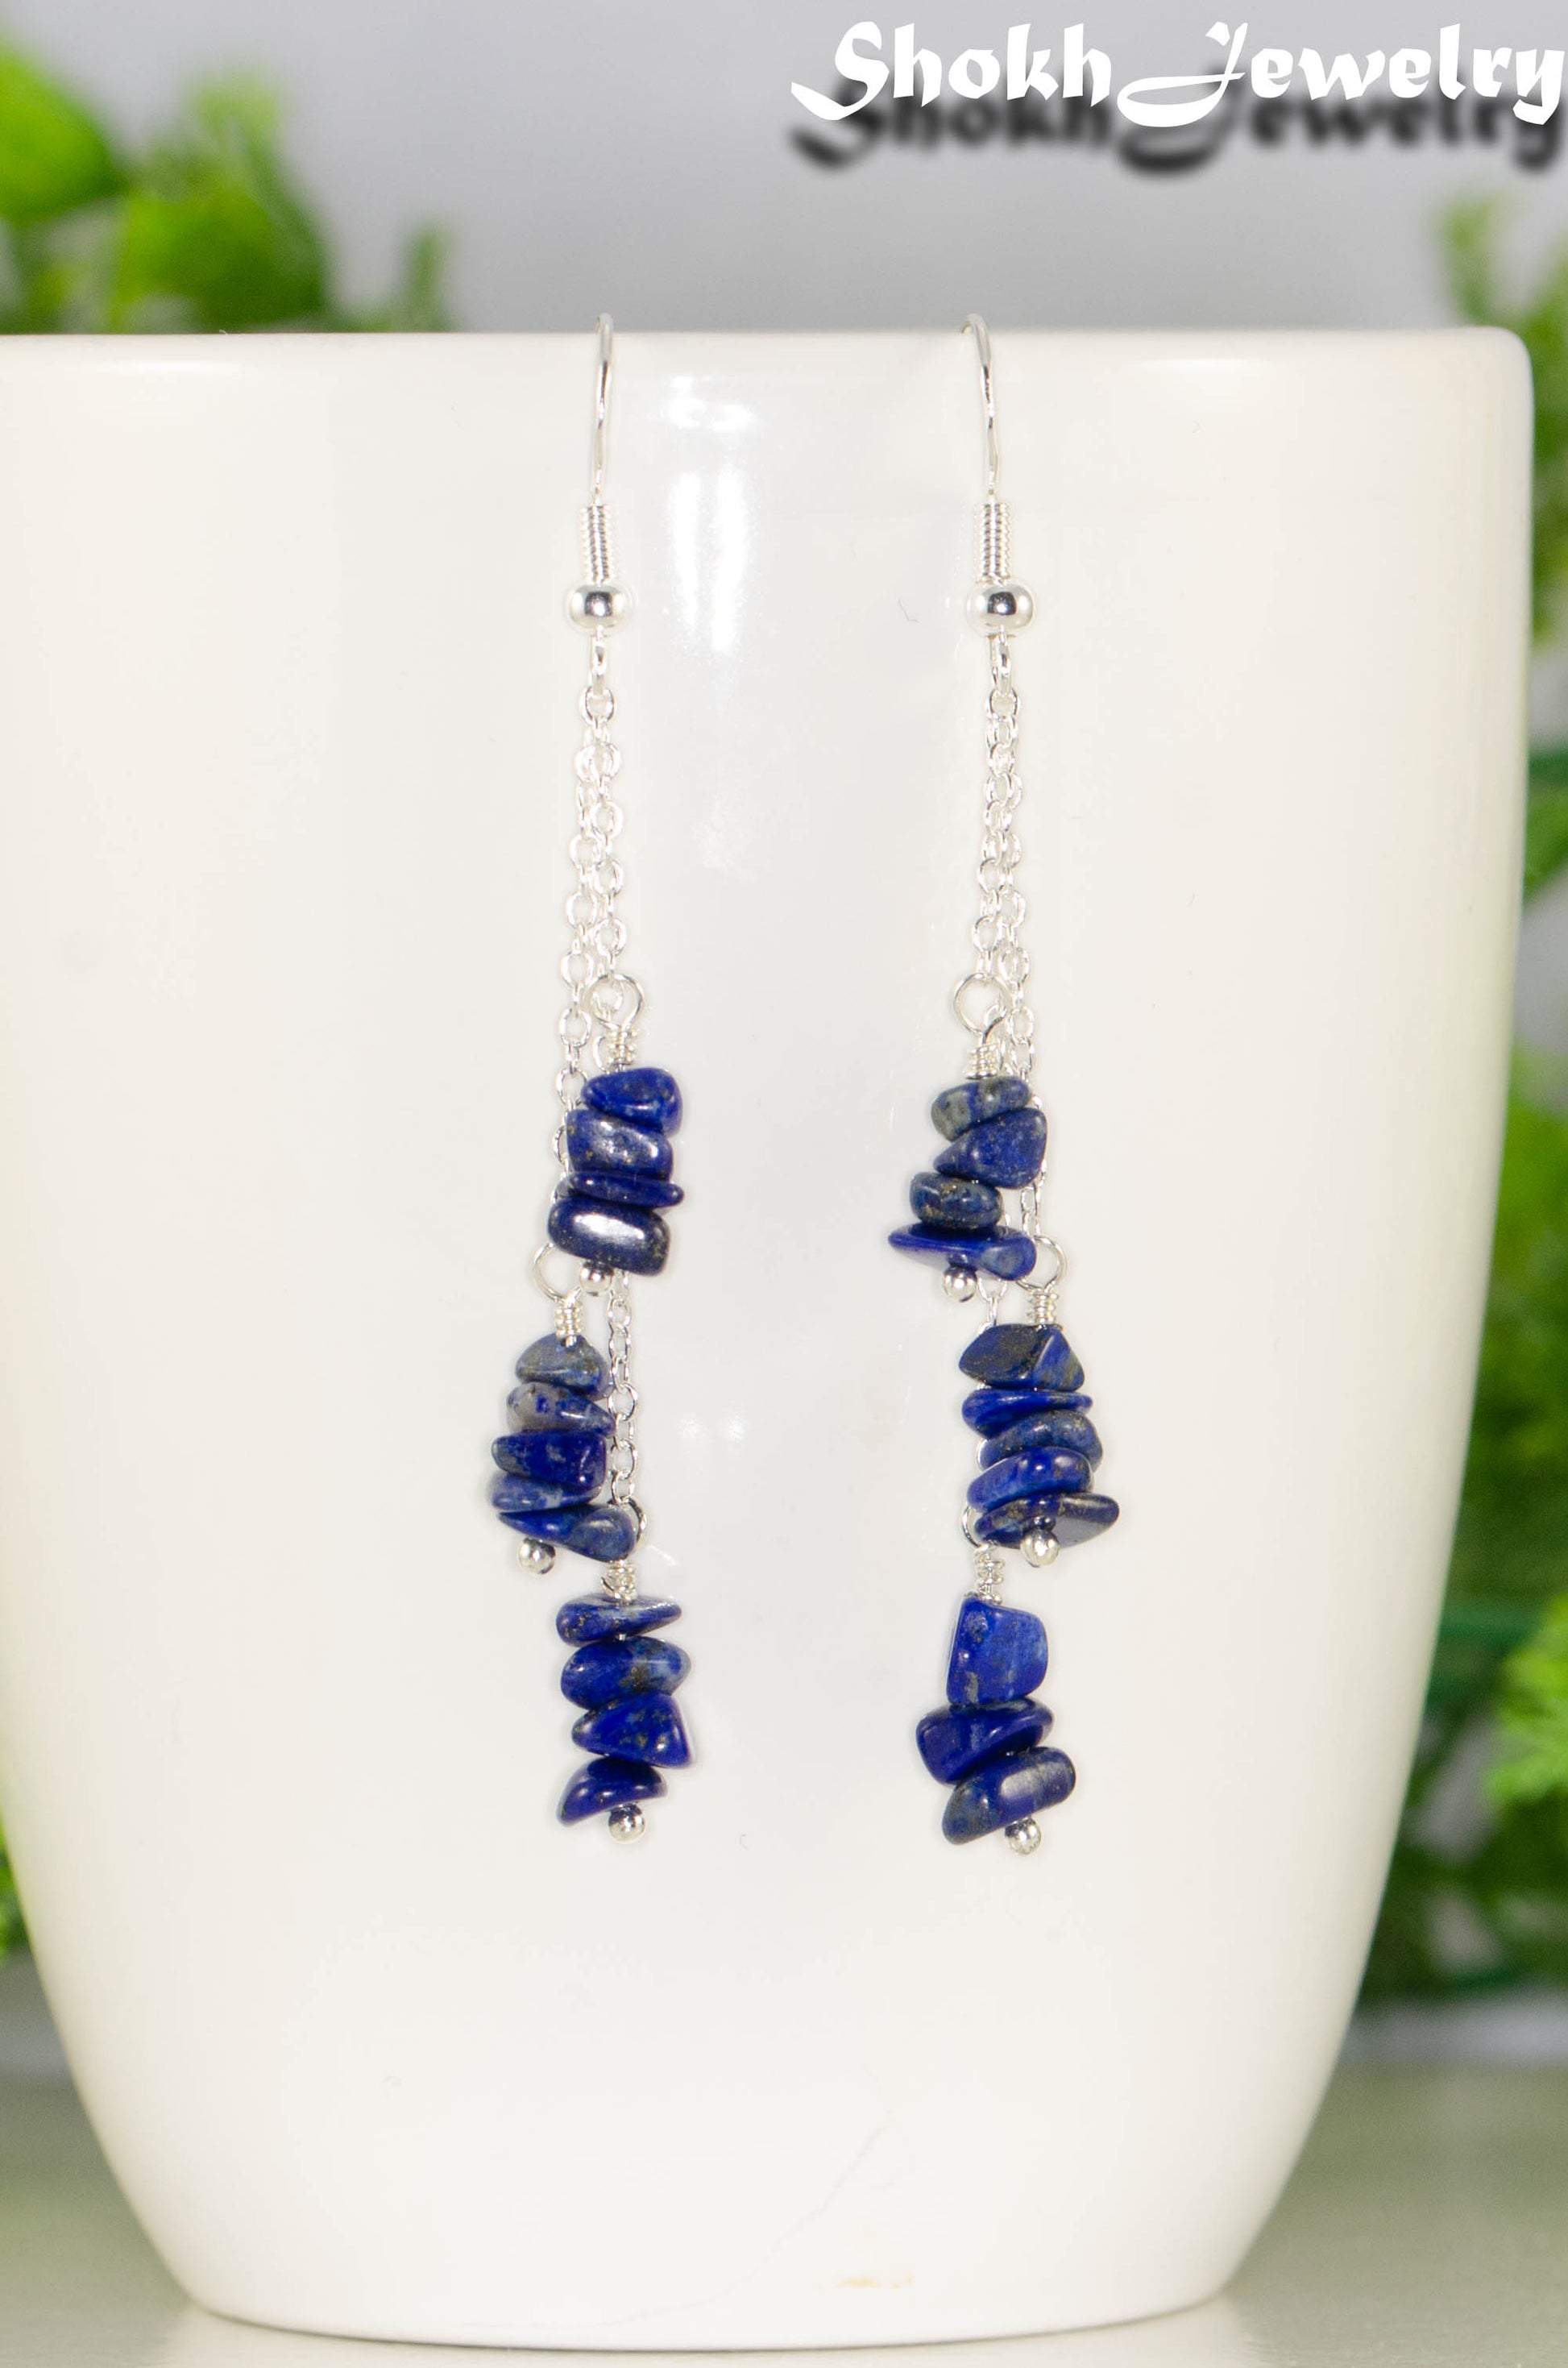 Long Silver Plated Chain and Lapis Lazuli Chip Earrings on a mug